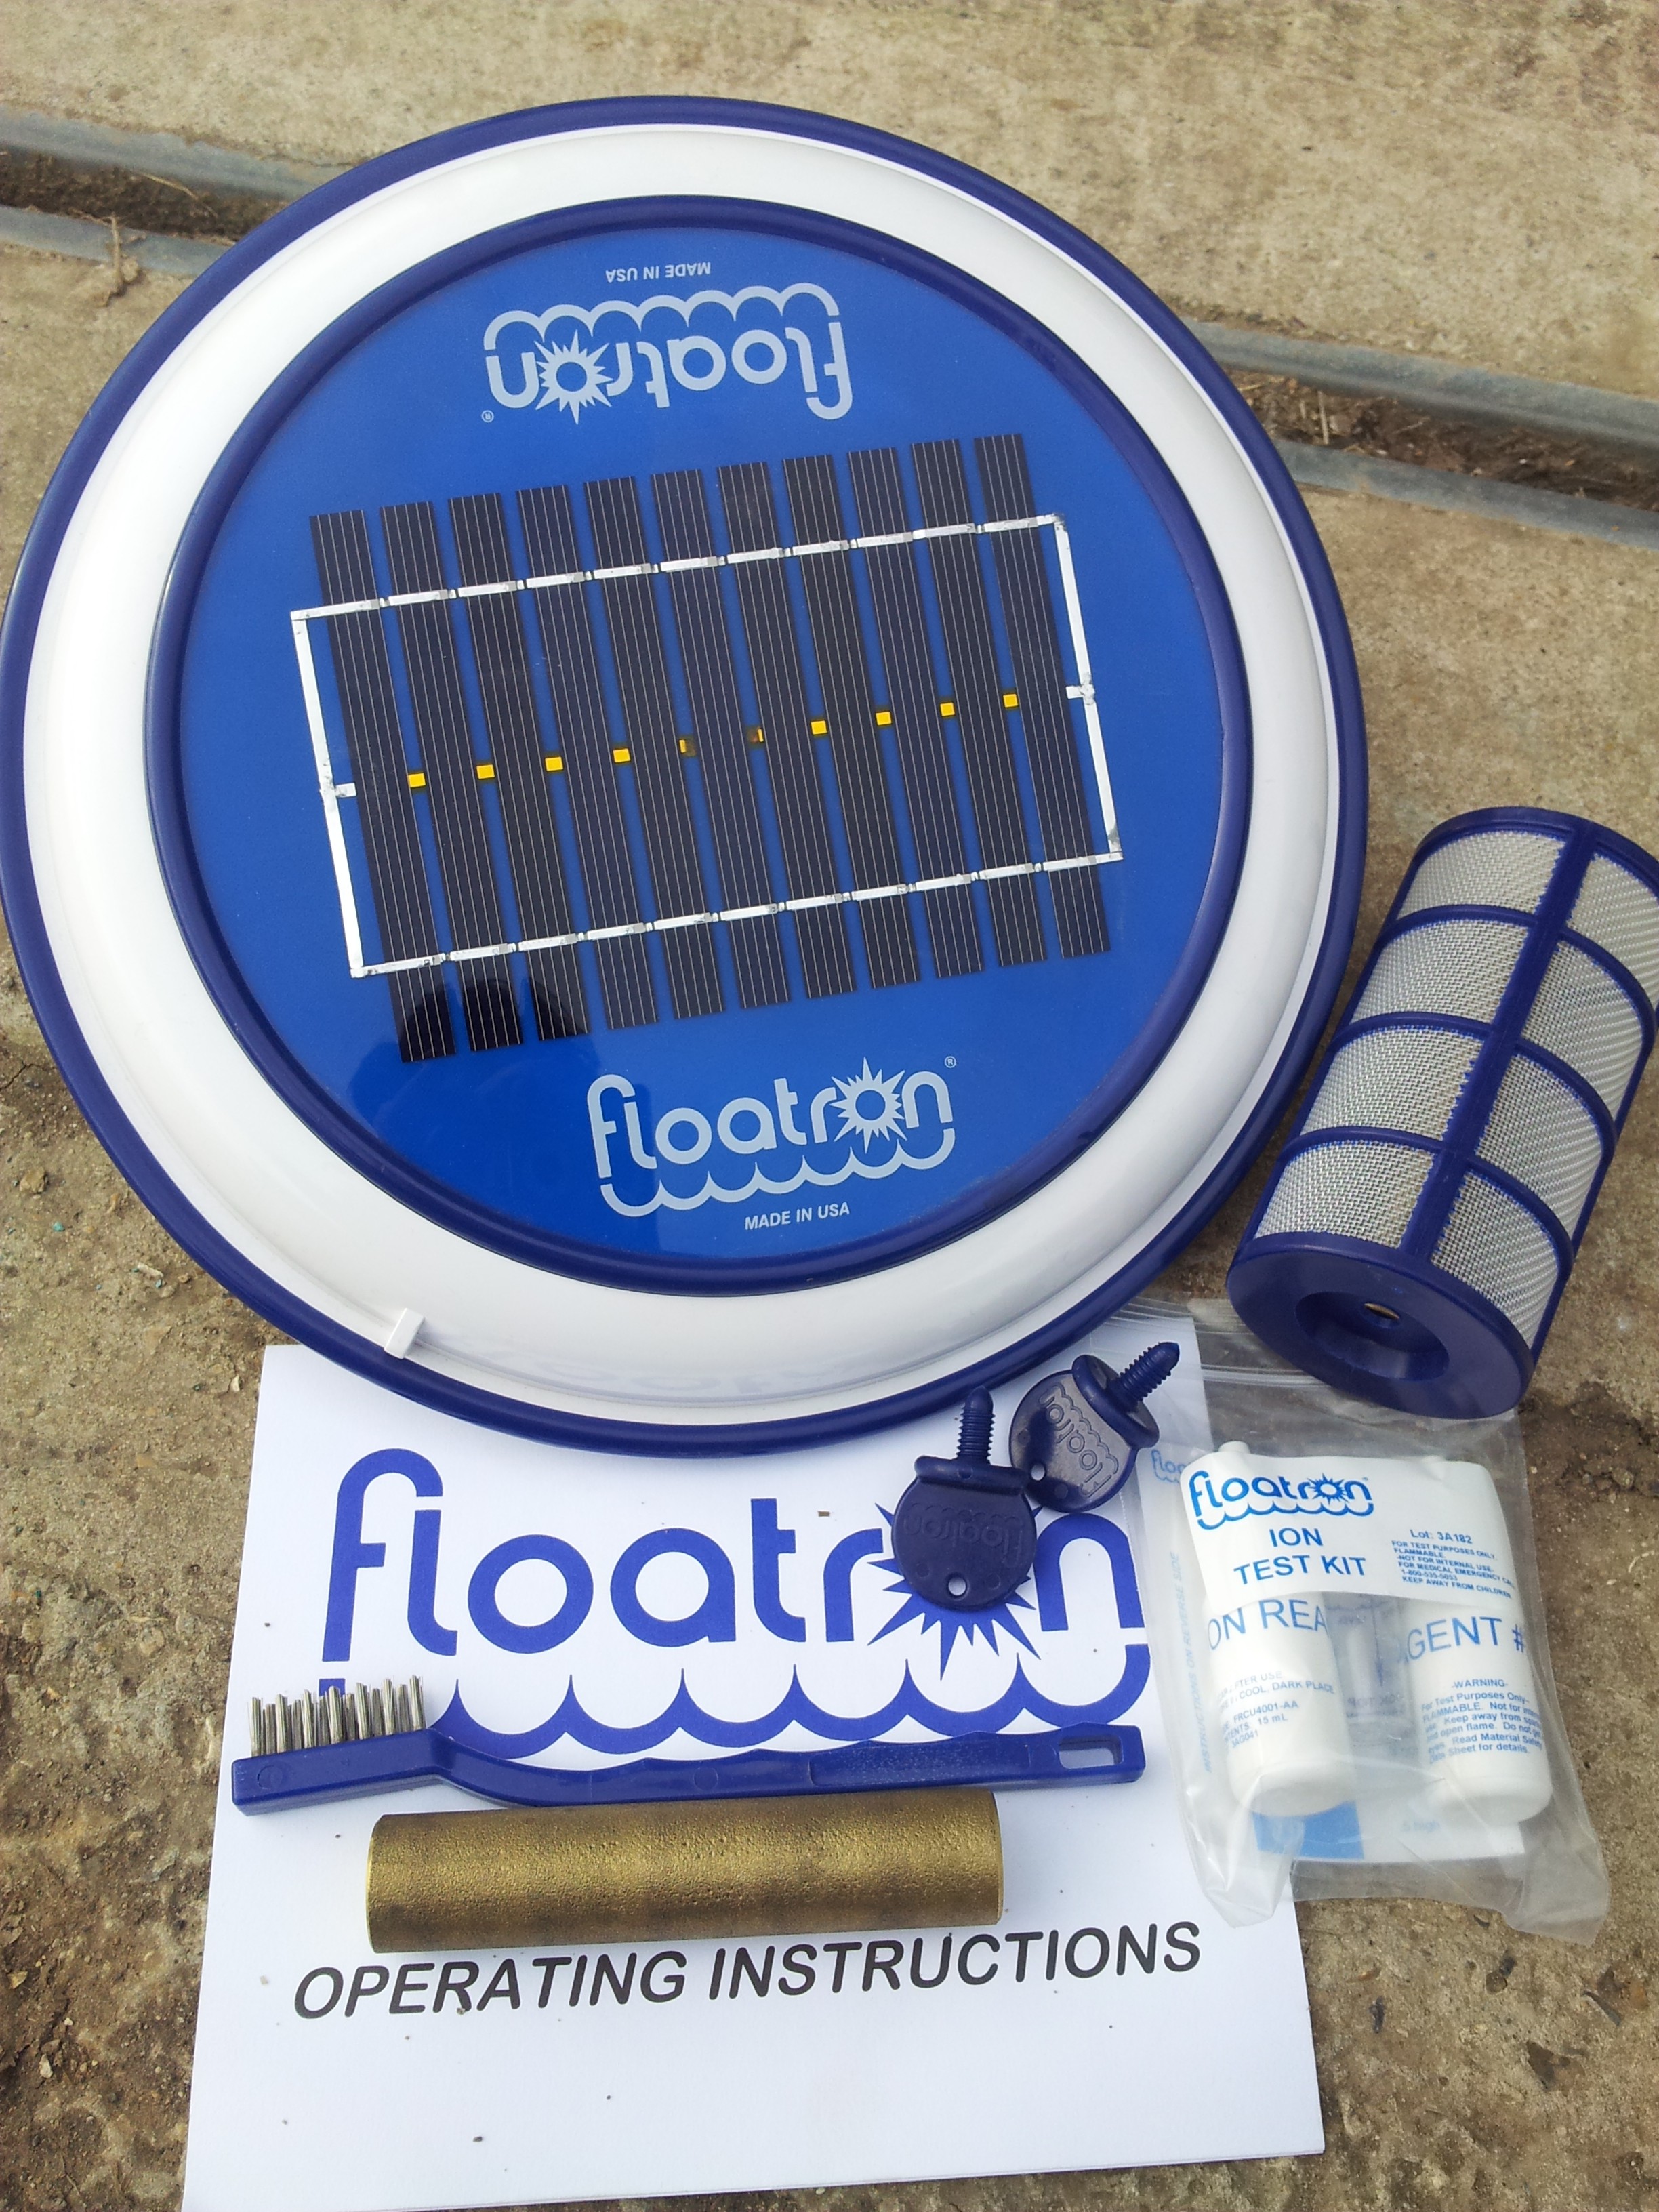 Get your floatron and your pool ready for a busy summer